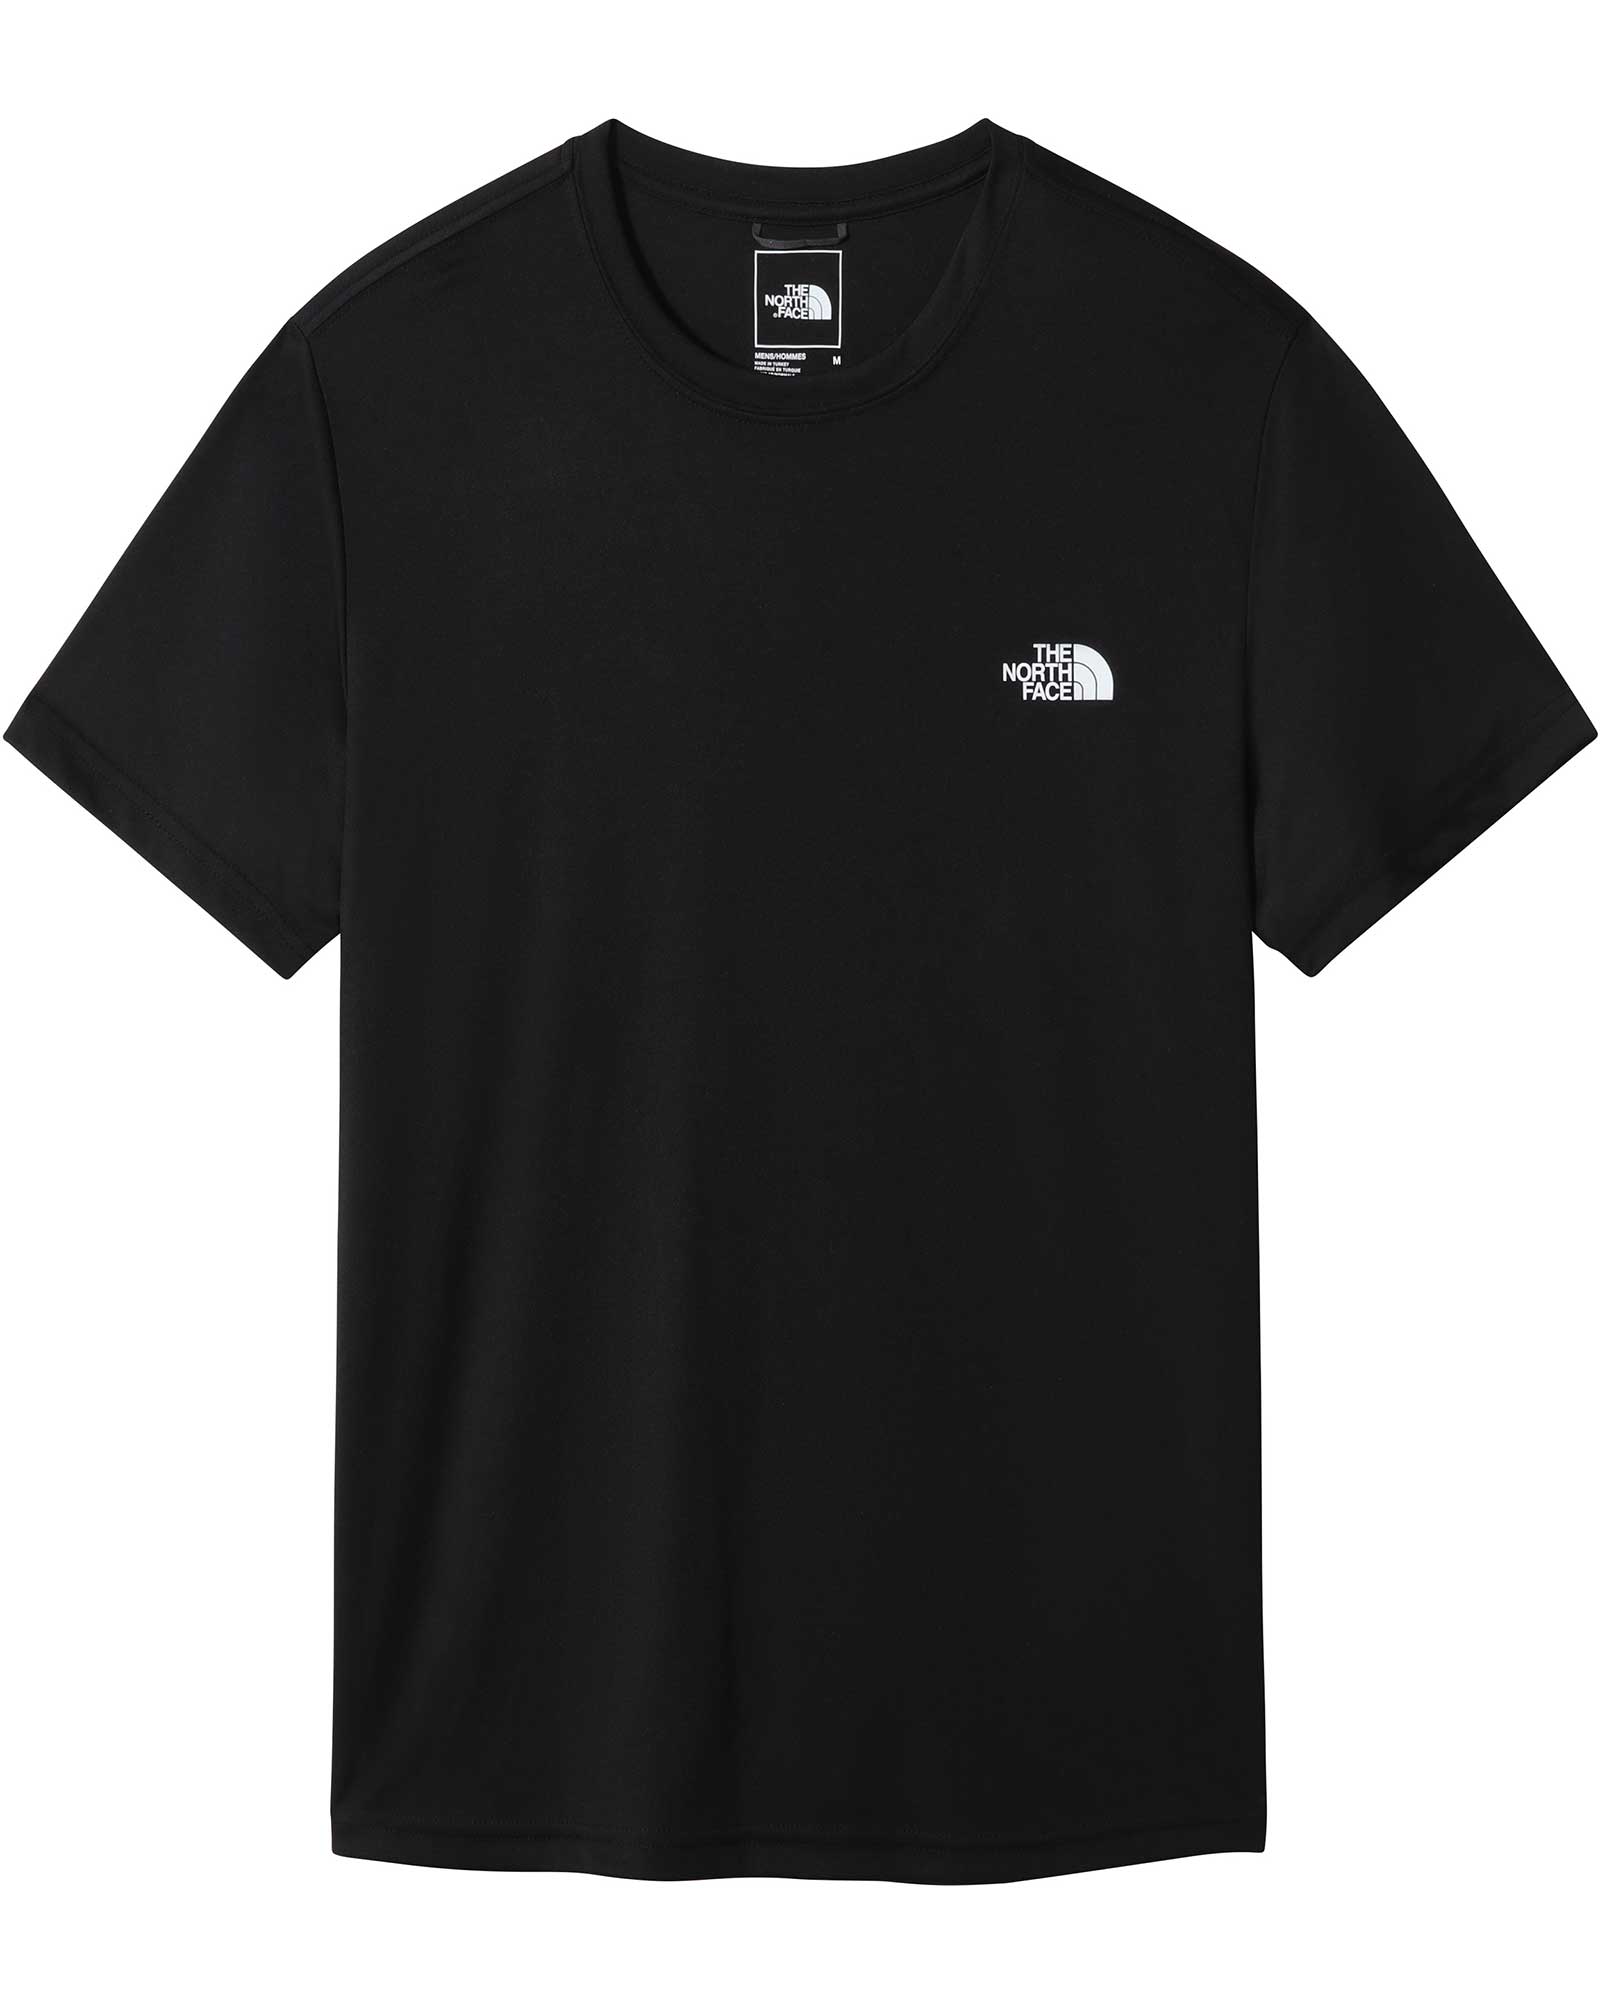 Product image of The North Face Reaxion Amp Men's Crew